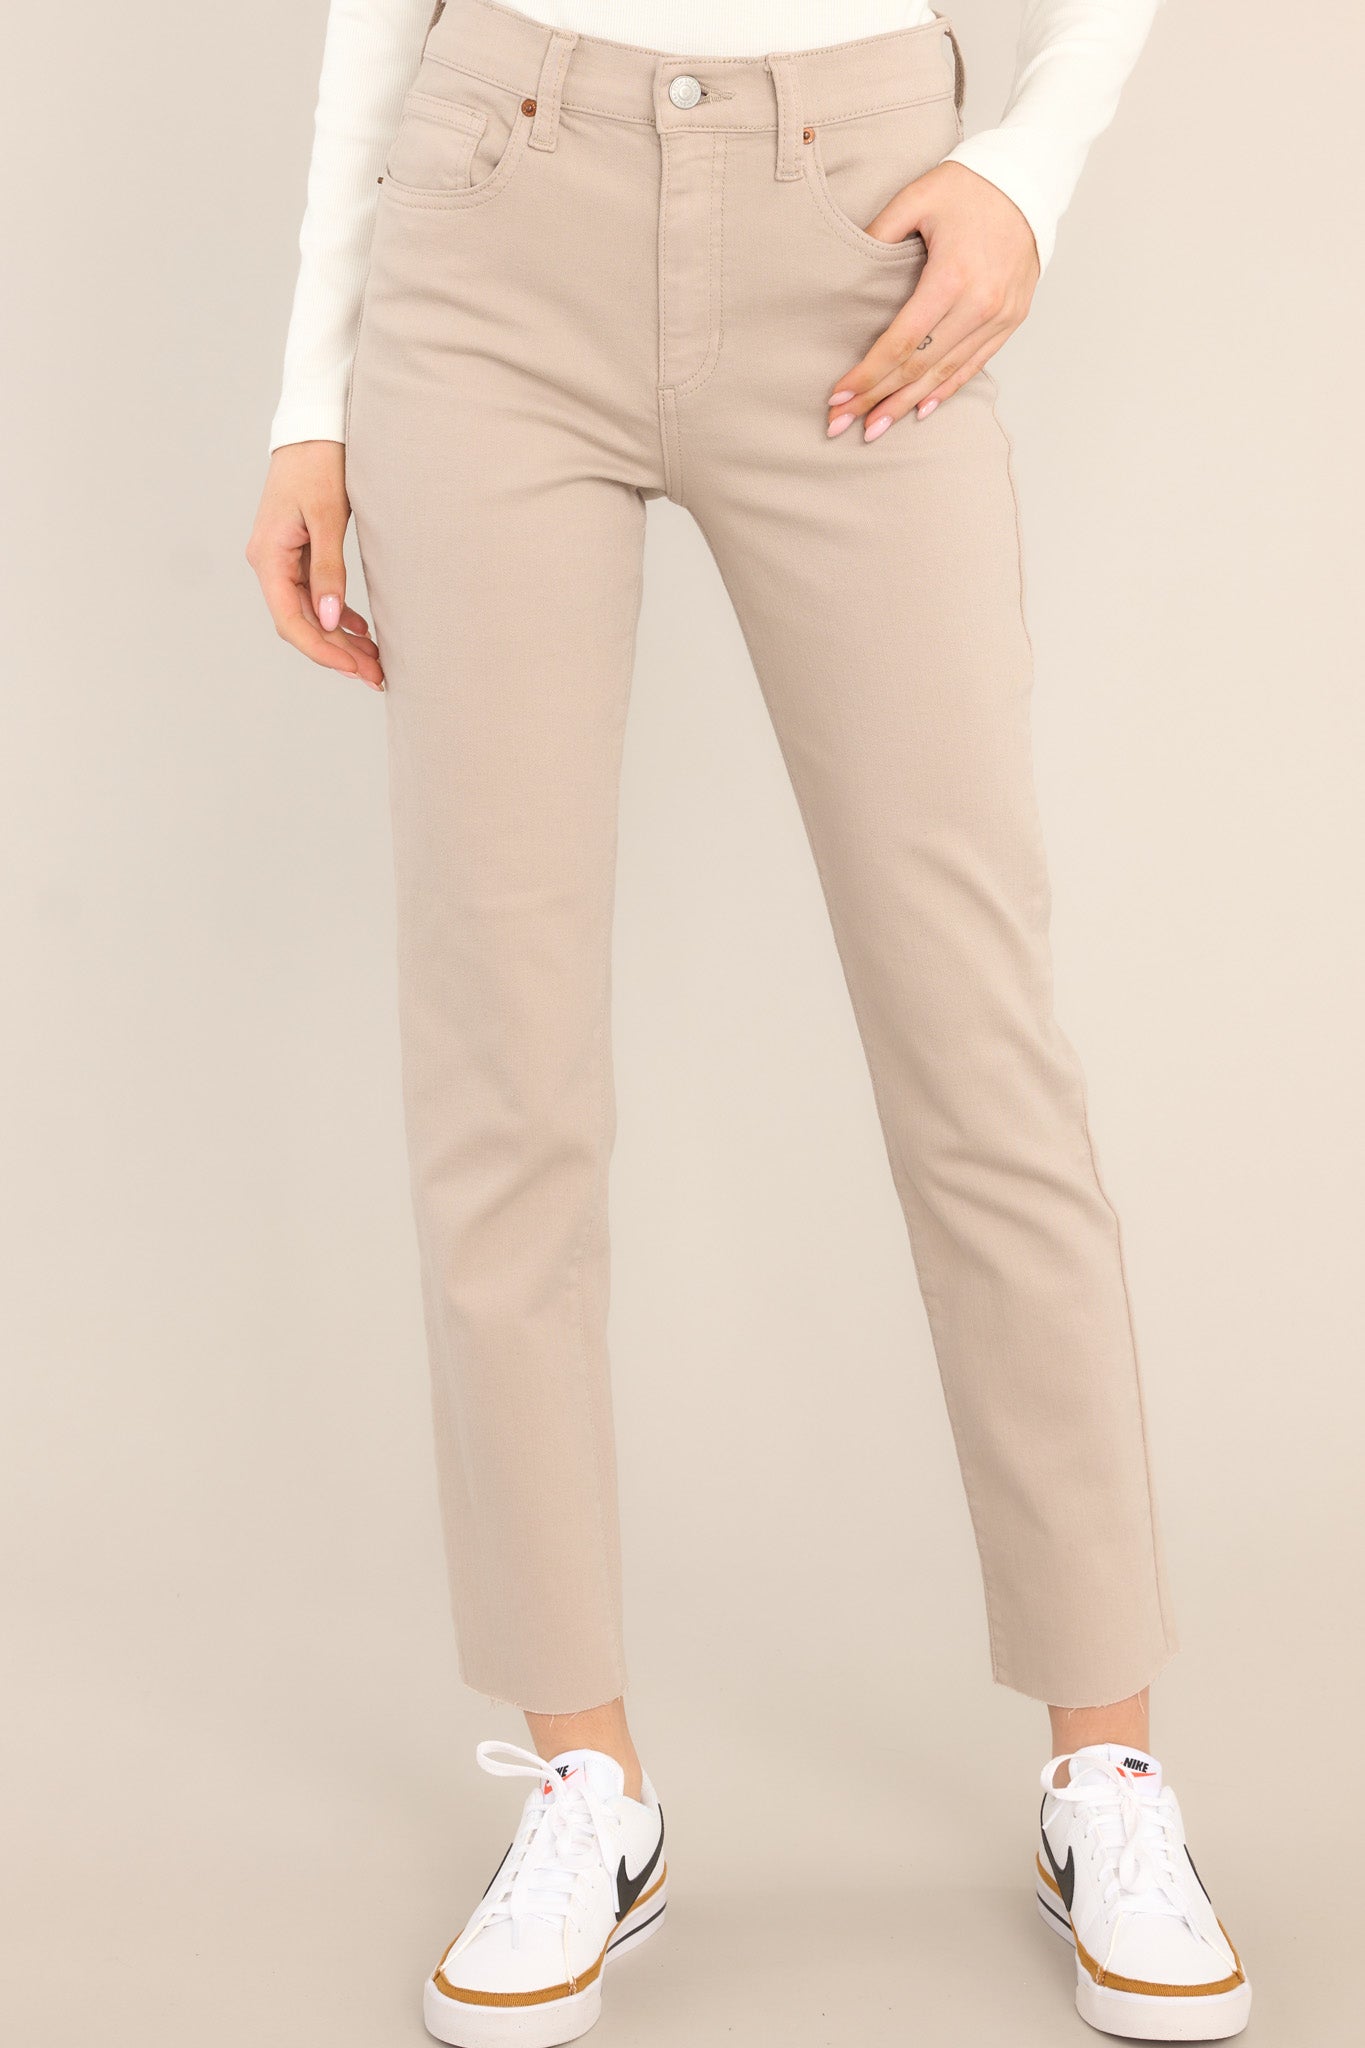 These khaki jeans feature a high waisted deign, a zipper and button closure, functional belt loops and pockets, and a raw hemline. 